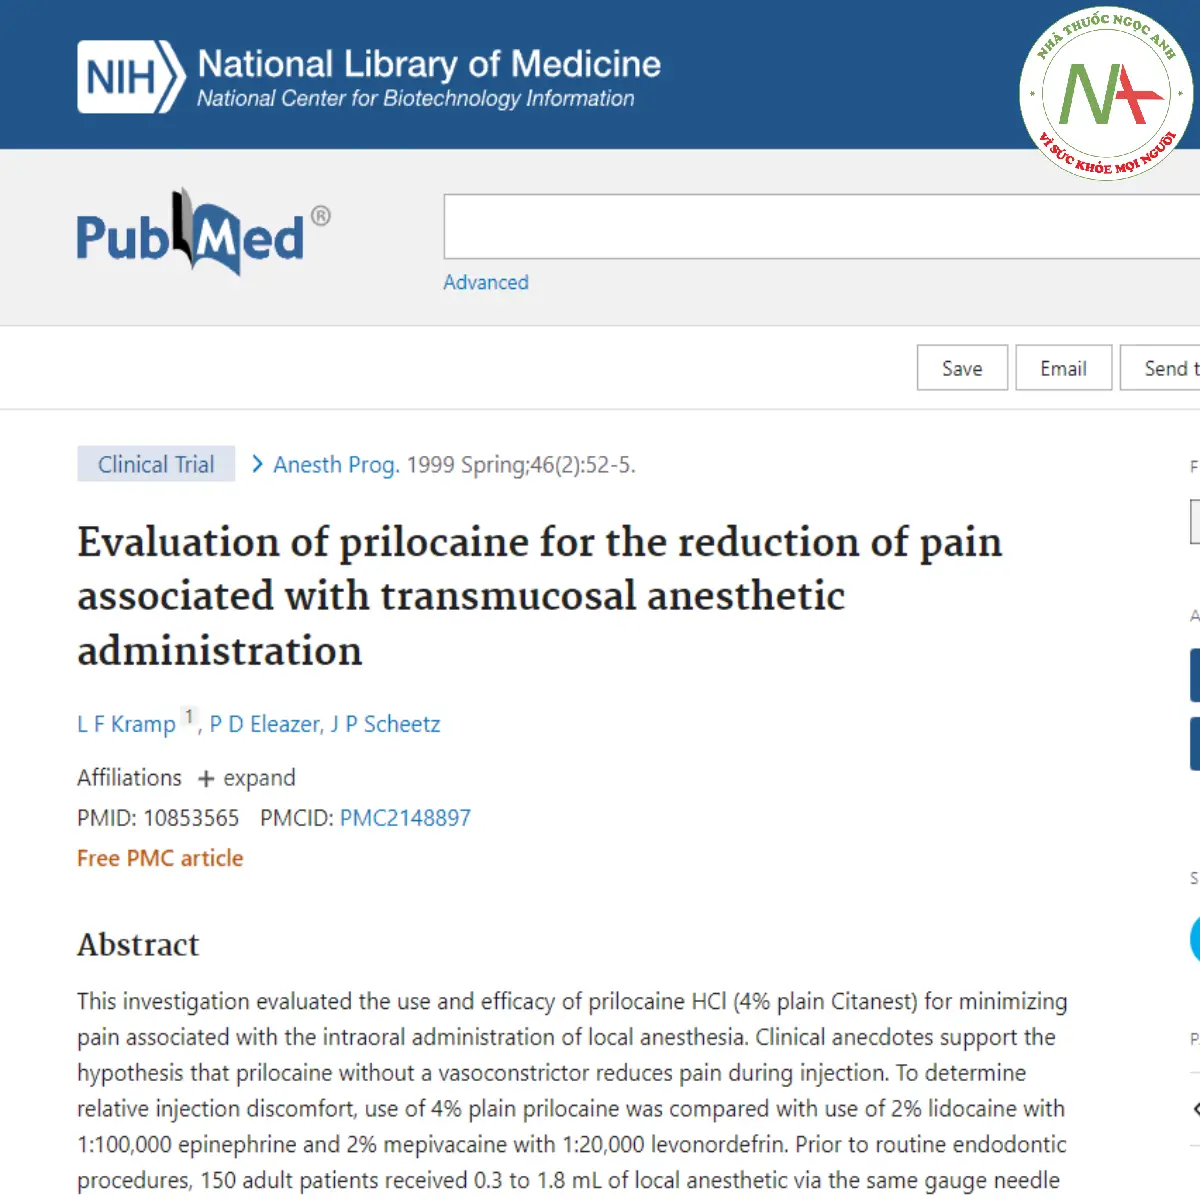 Evaluation of prilocaine for the reduction of pain associated with transmucosal anesthetic administration